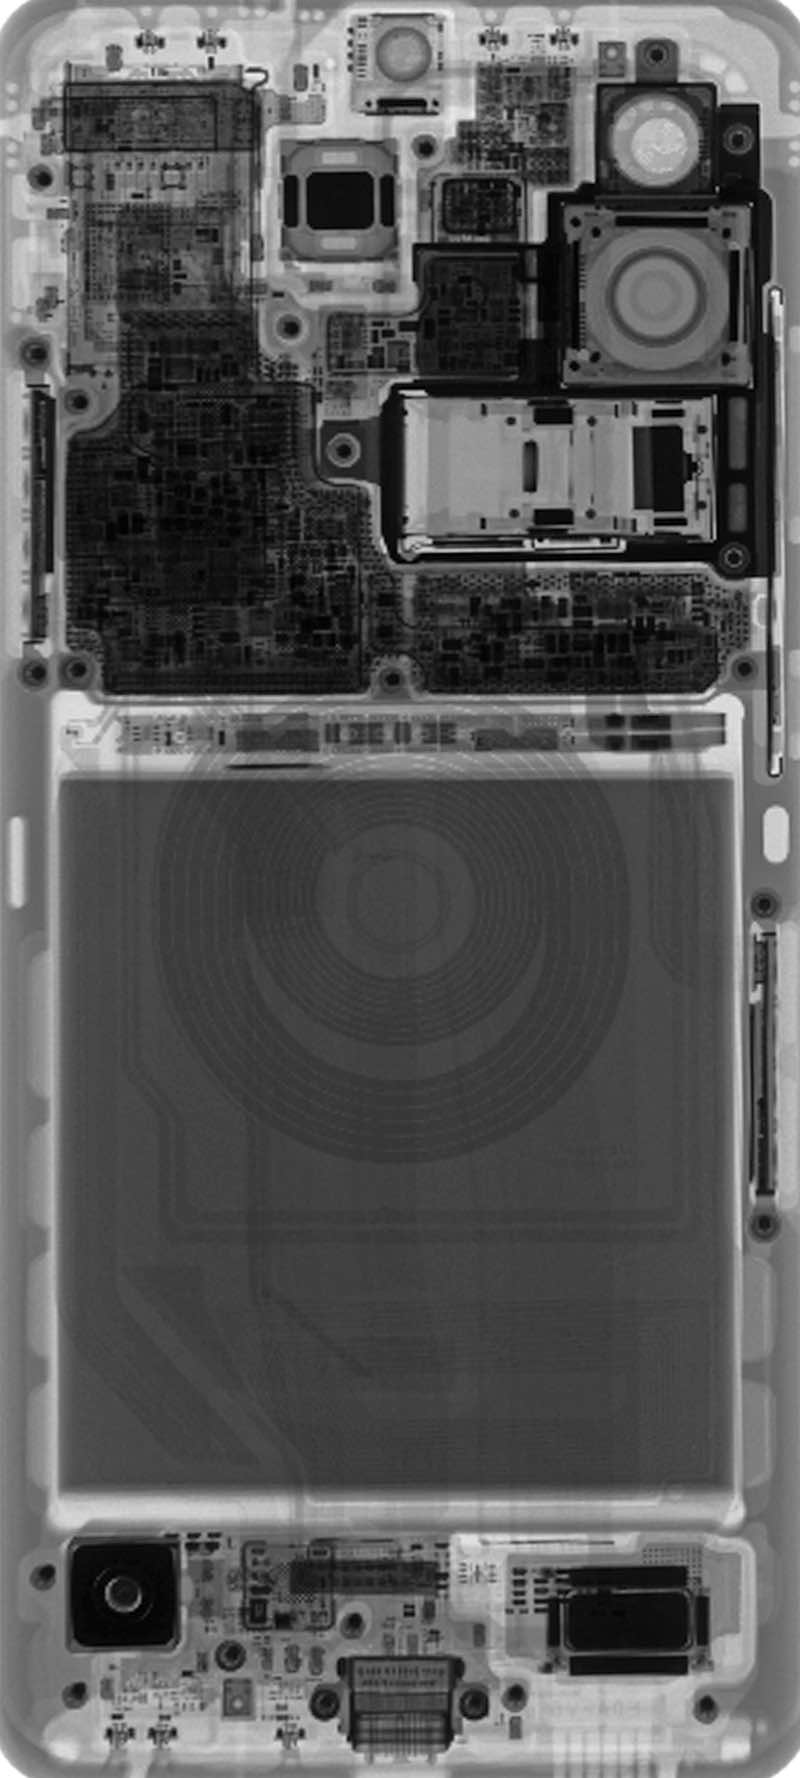 Check Out Samsung Galaxy S20 Wallpaper Of The Internals, X Ray Too